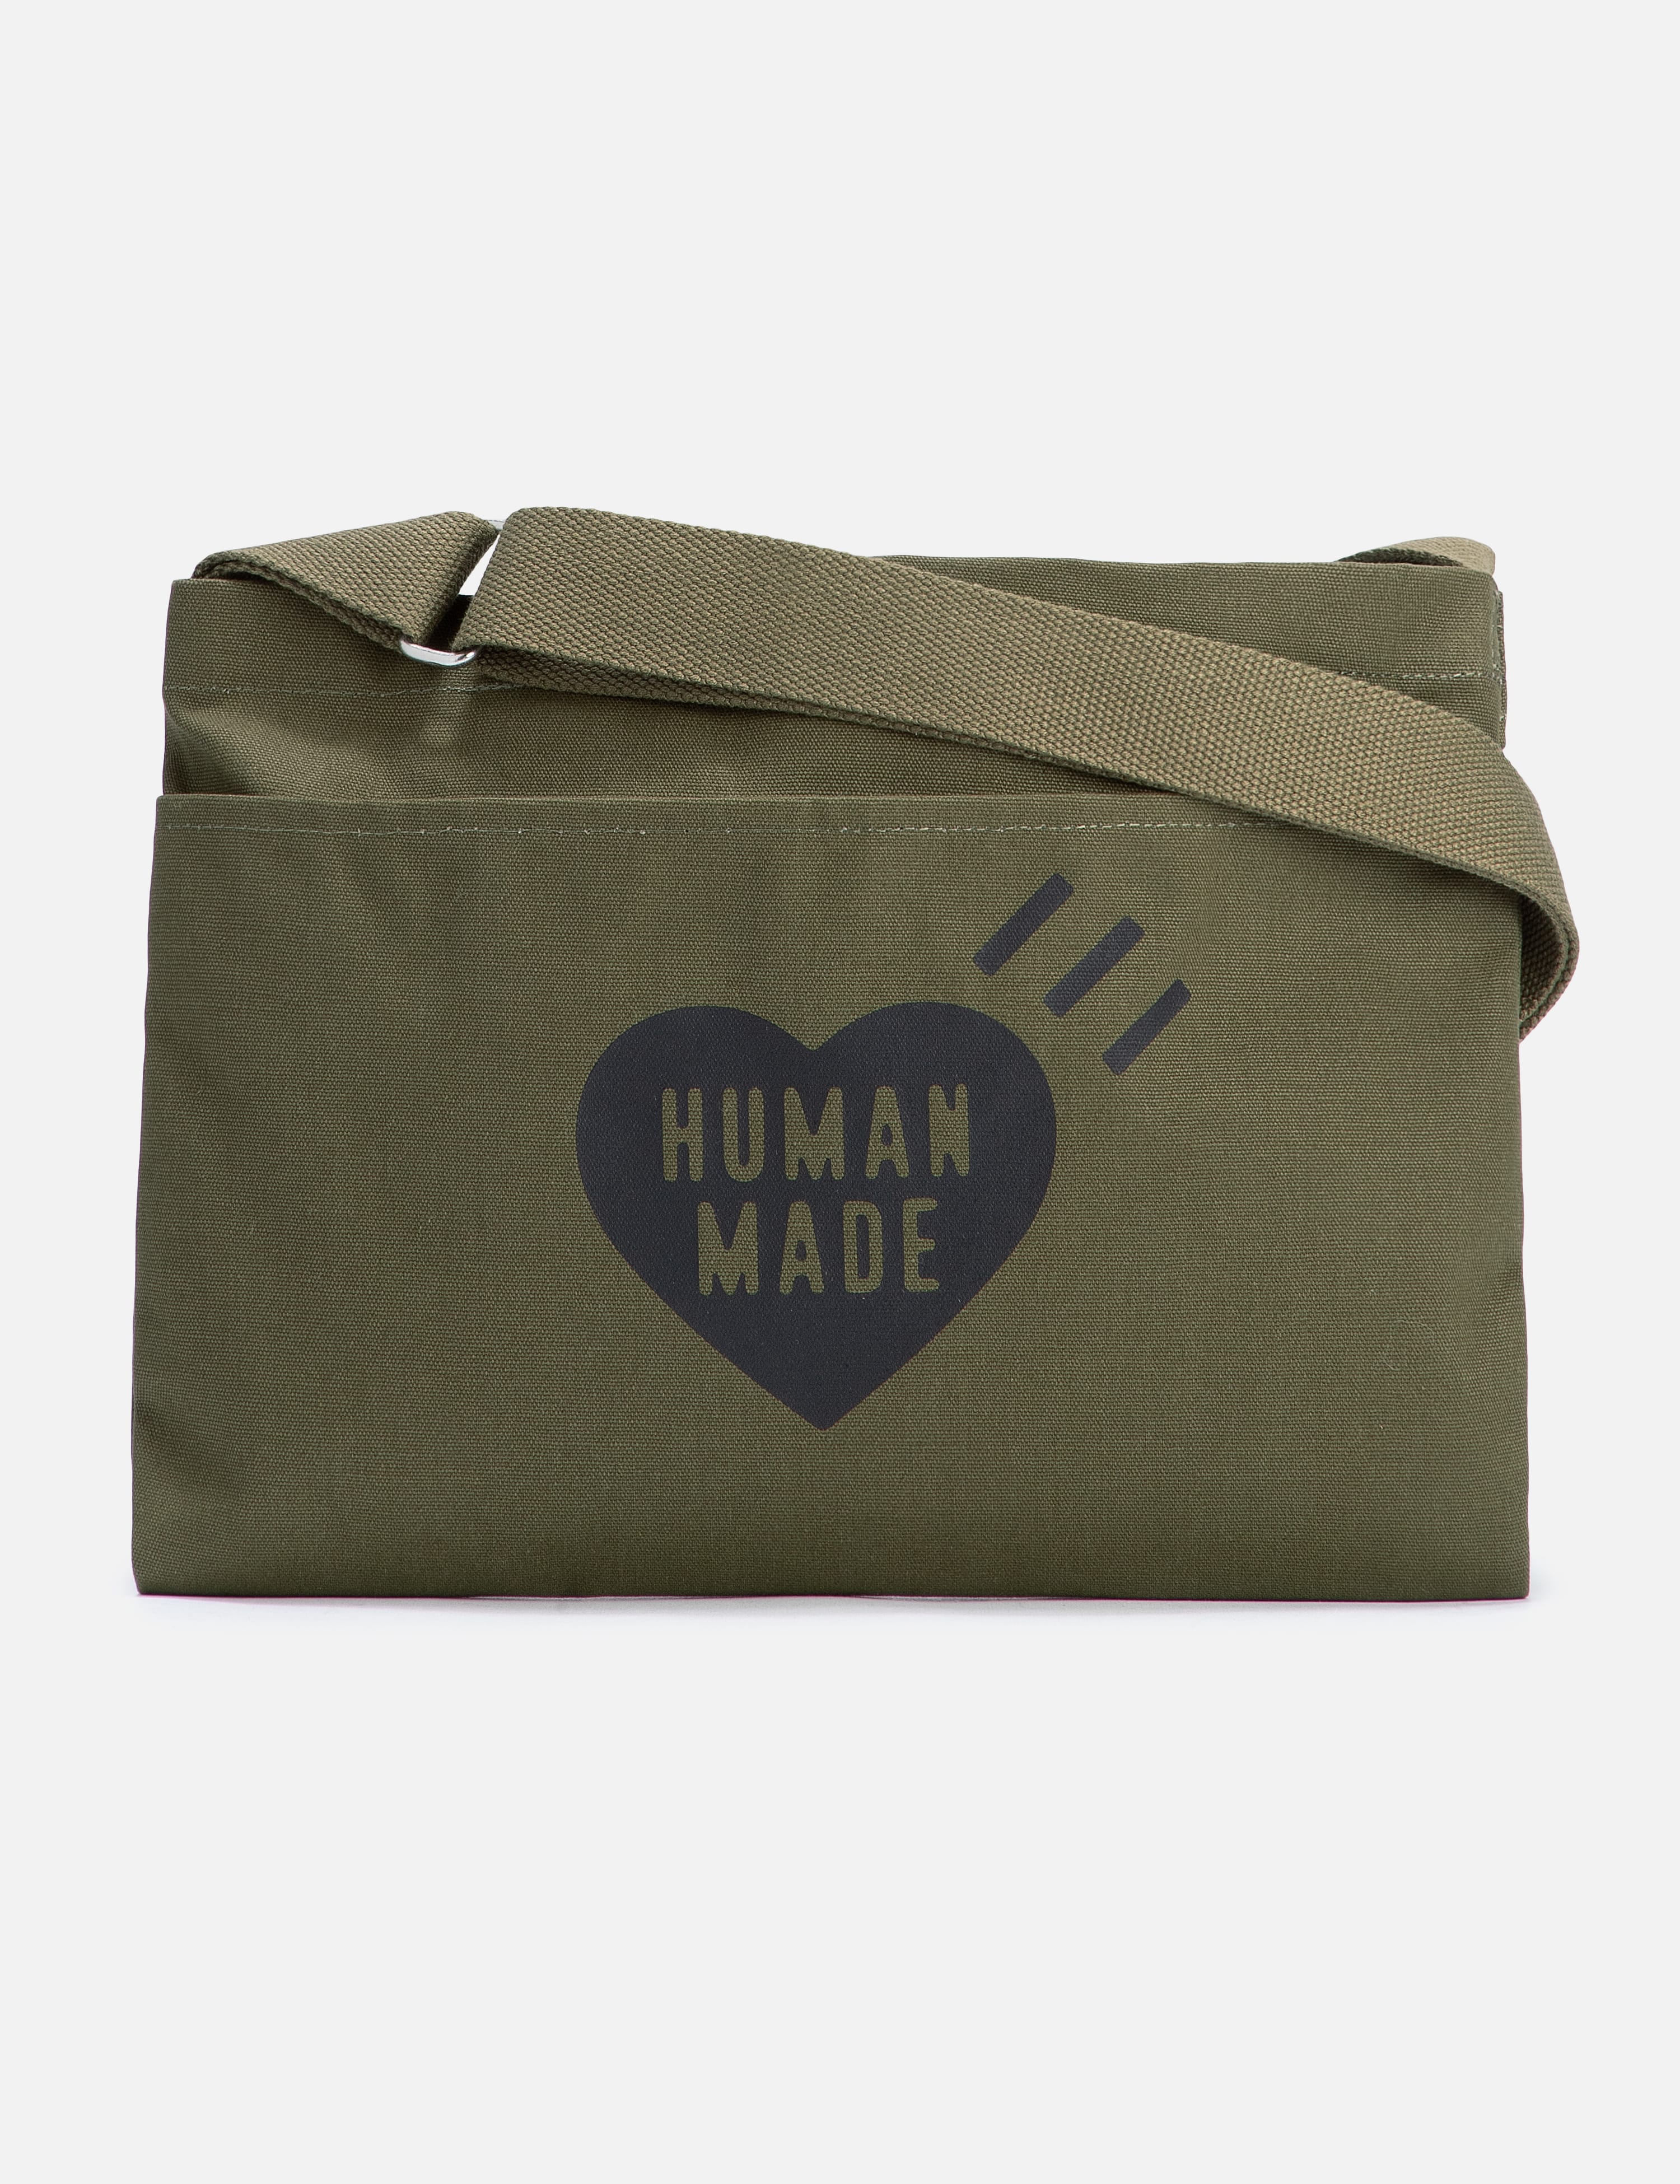 Human Made | HBX - Globally Curated Fashion and Lifestyle by 